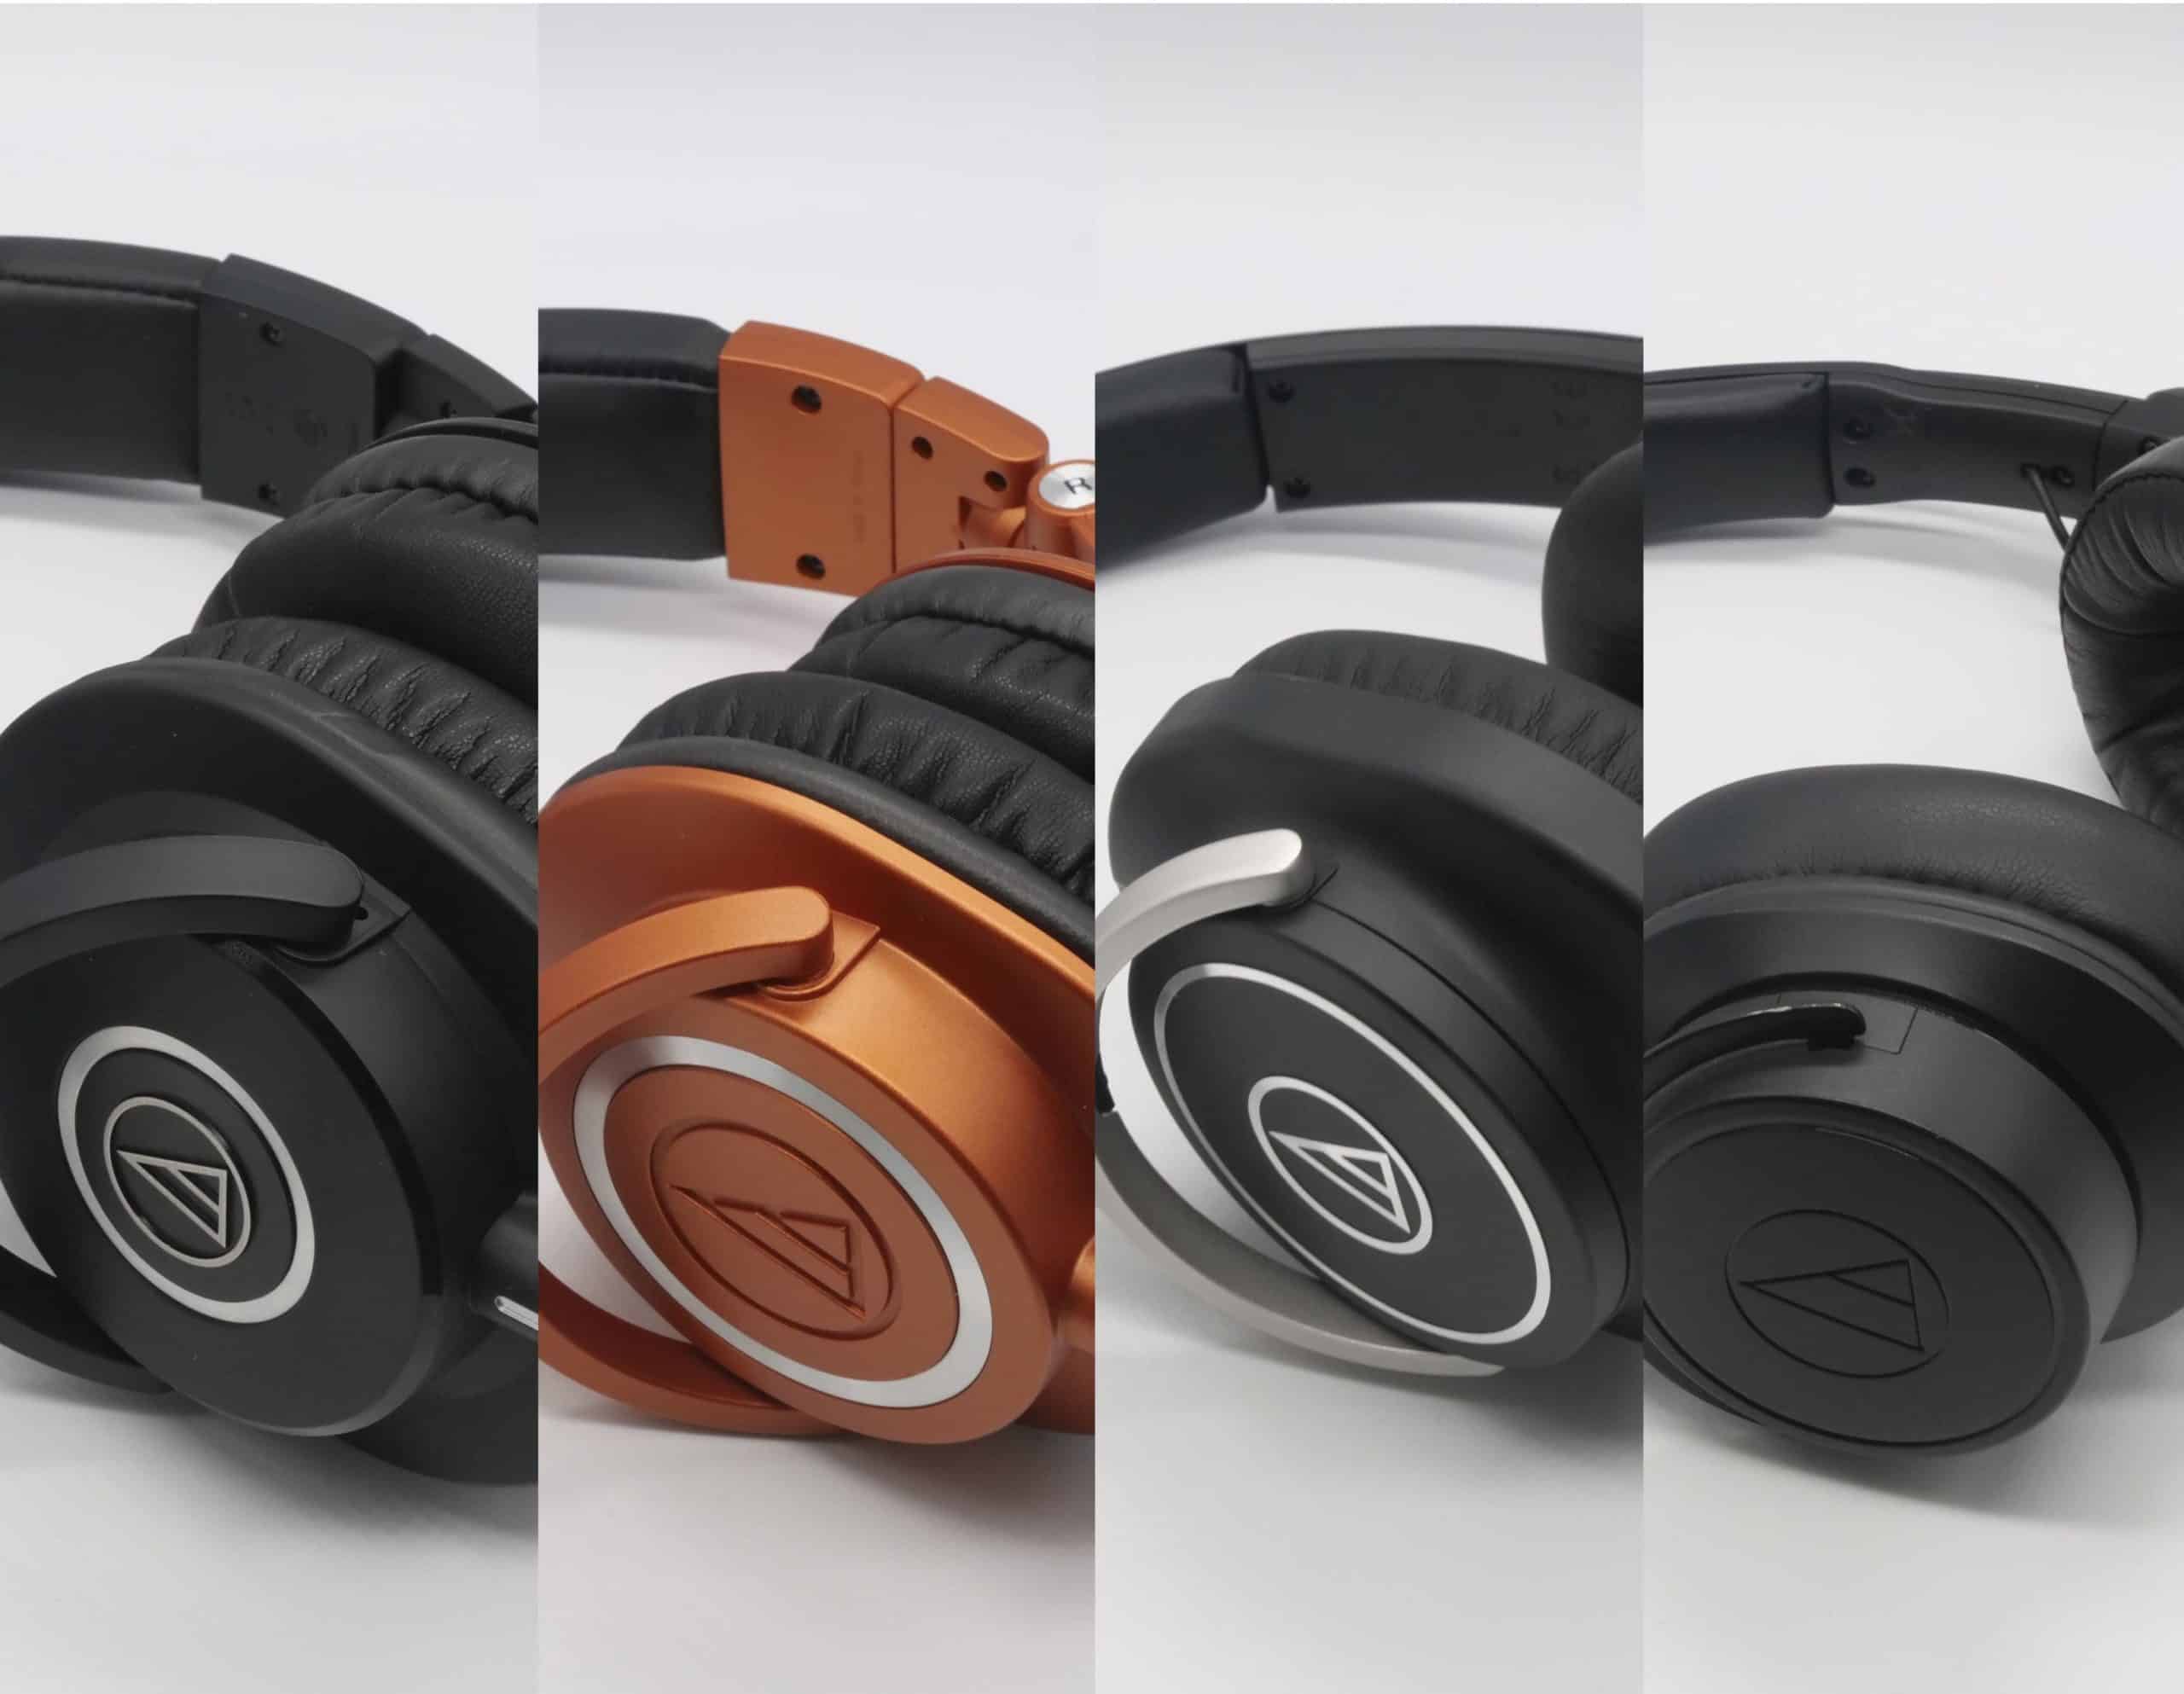 Audio-Technica Comparison: M40x, M50x, M60x, M70x - Can They All Be Used as Studio  Headphones? - Major HiFi